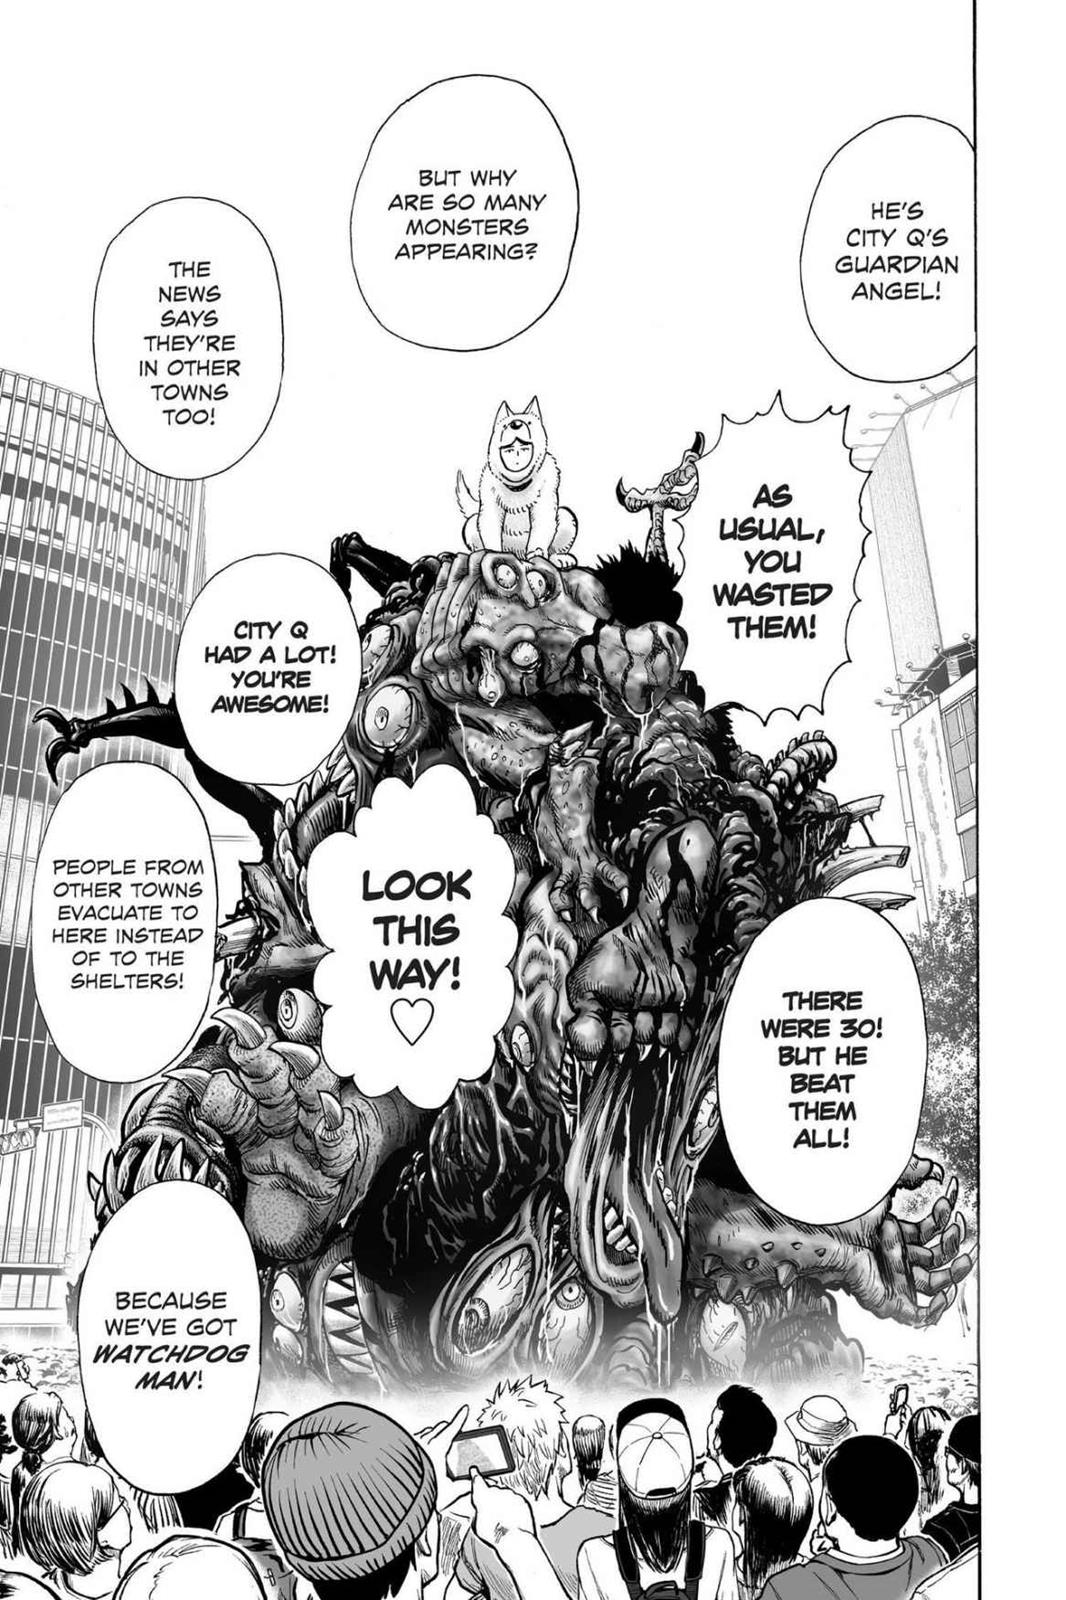 One-Punch Man, Punch 67 image 25